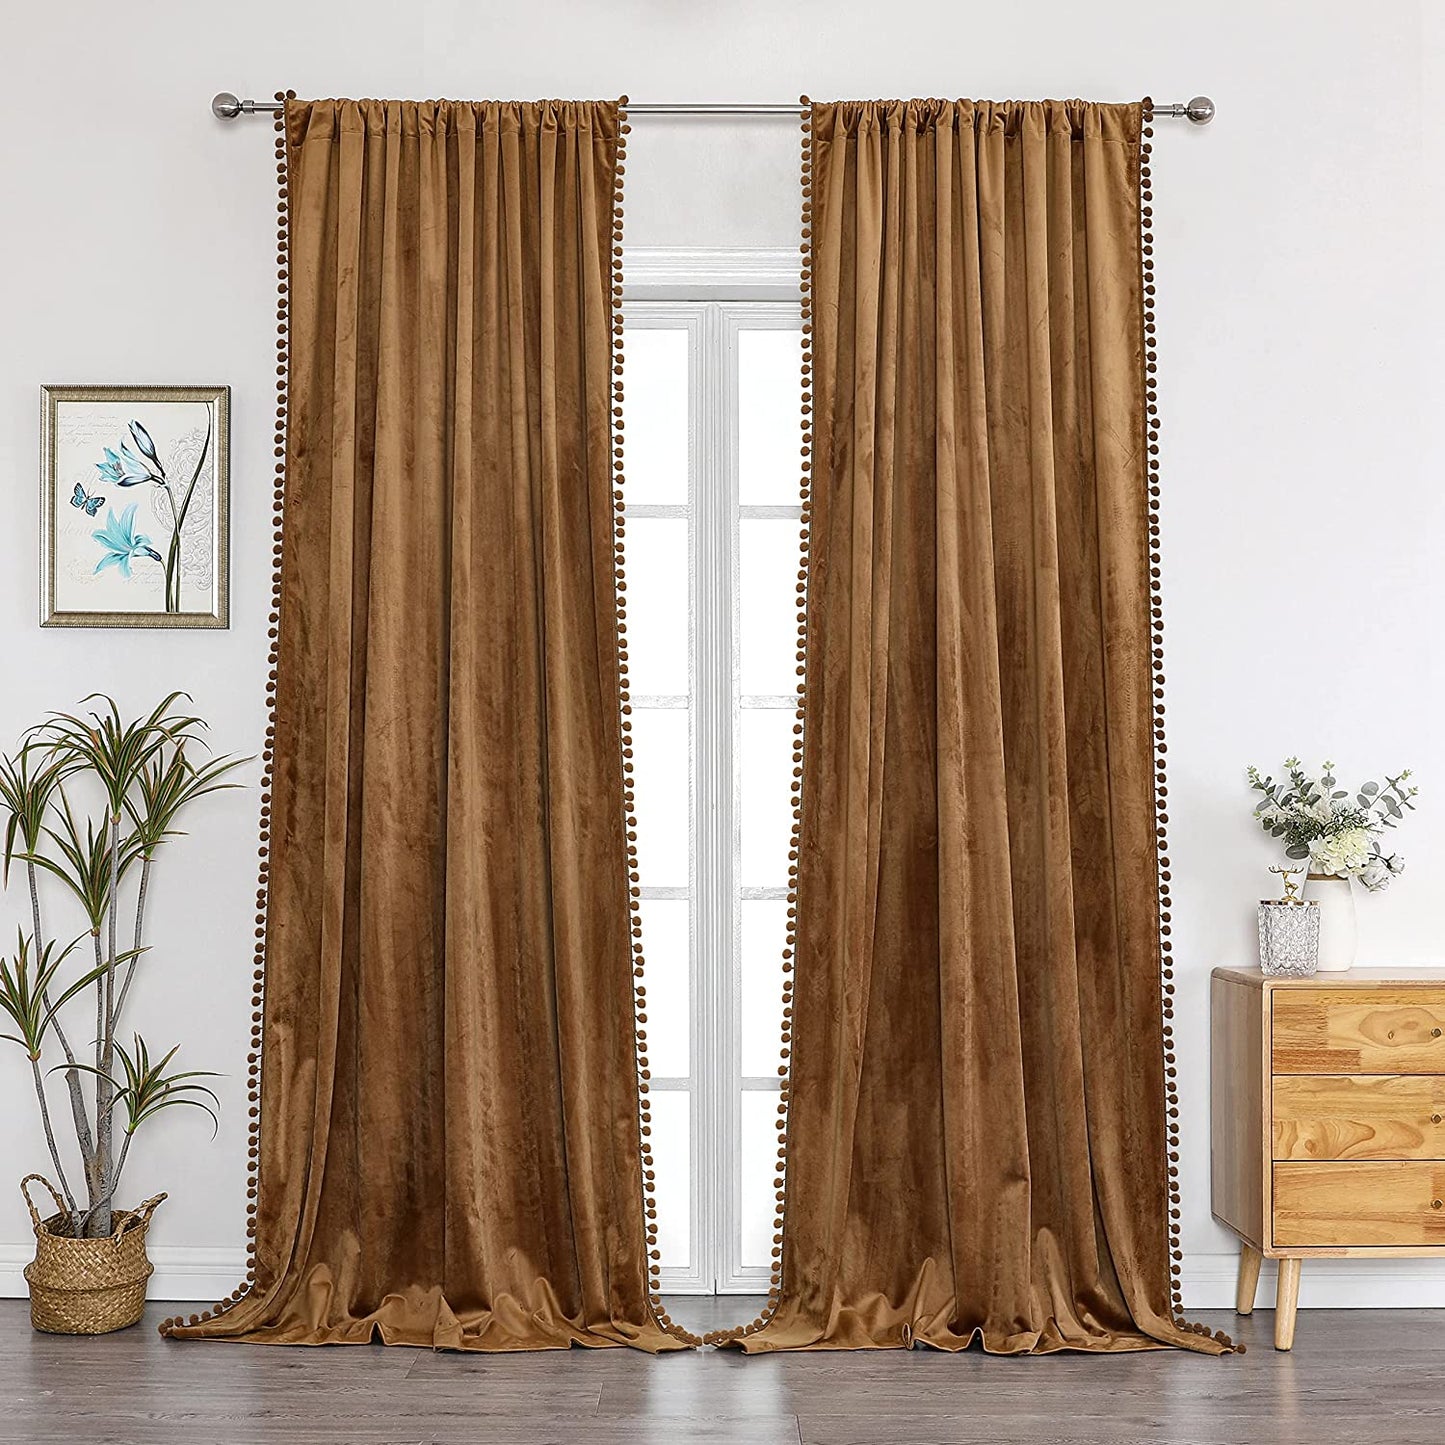 Benedeco Green Velvet Curtains for Bedroom Window, Super Soft Luxury Drapes, Room Darkening Thermal Insulated Rod Pocket Curtain for Living Room, W52 by L84 Inches, 2 Panels  Benedeco A-Camel W52 * L90 | 2 Panels 